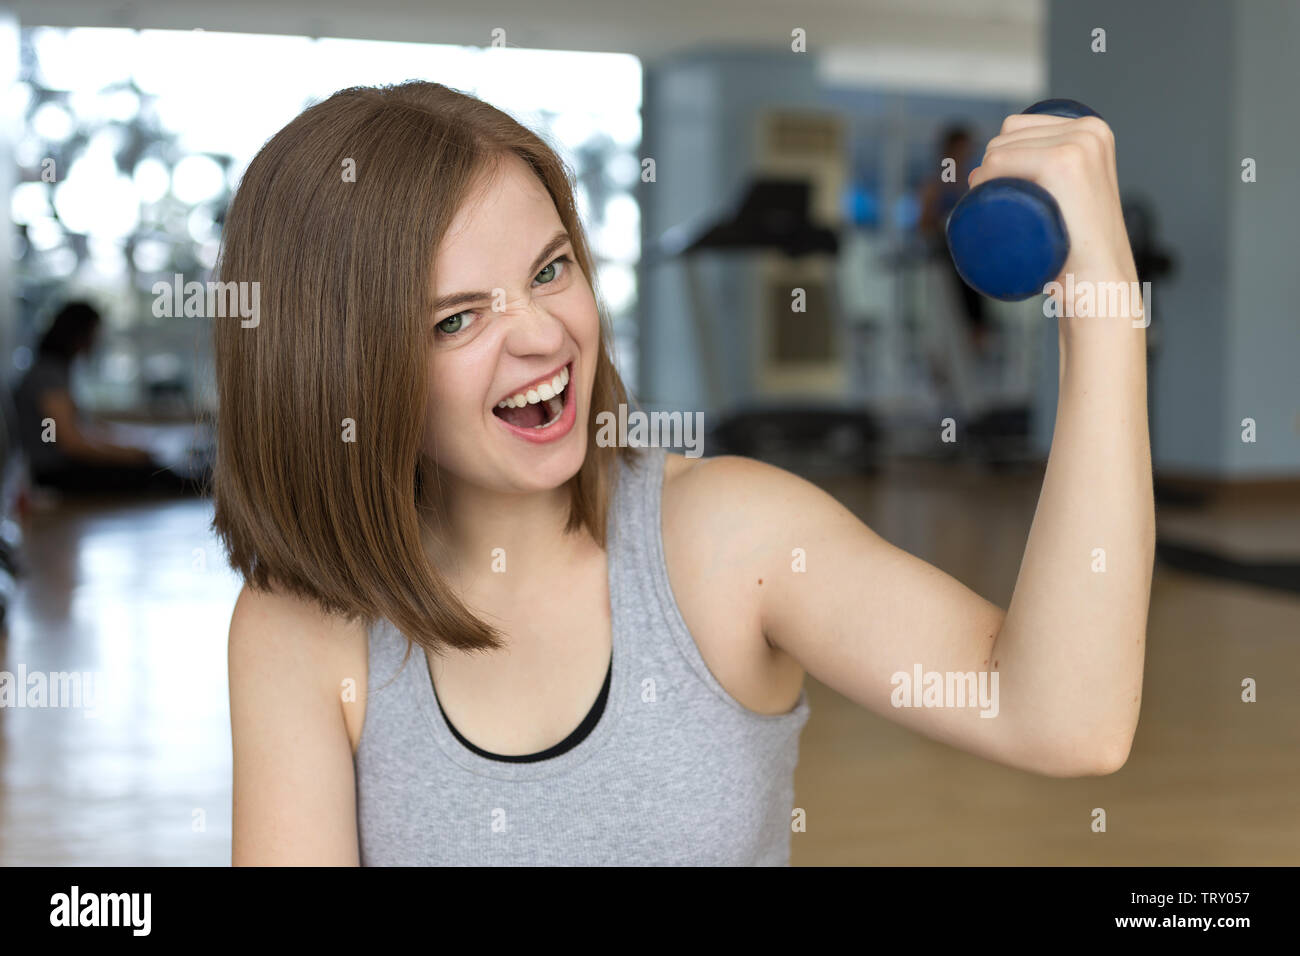 Smiling young caucasian woman girl doing workout with light dumbbells at the gym, lifting weights Stock Photo